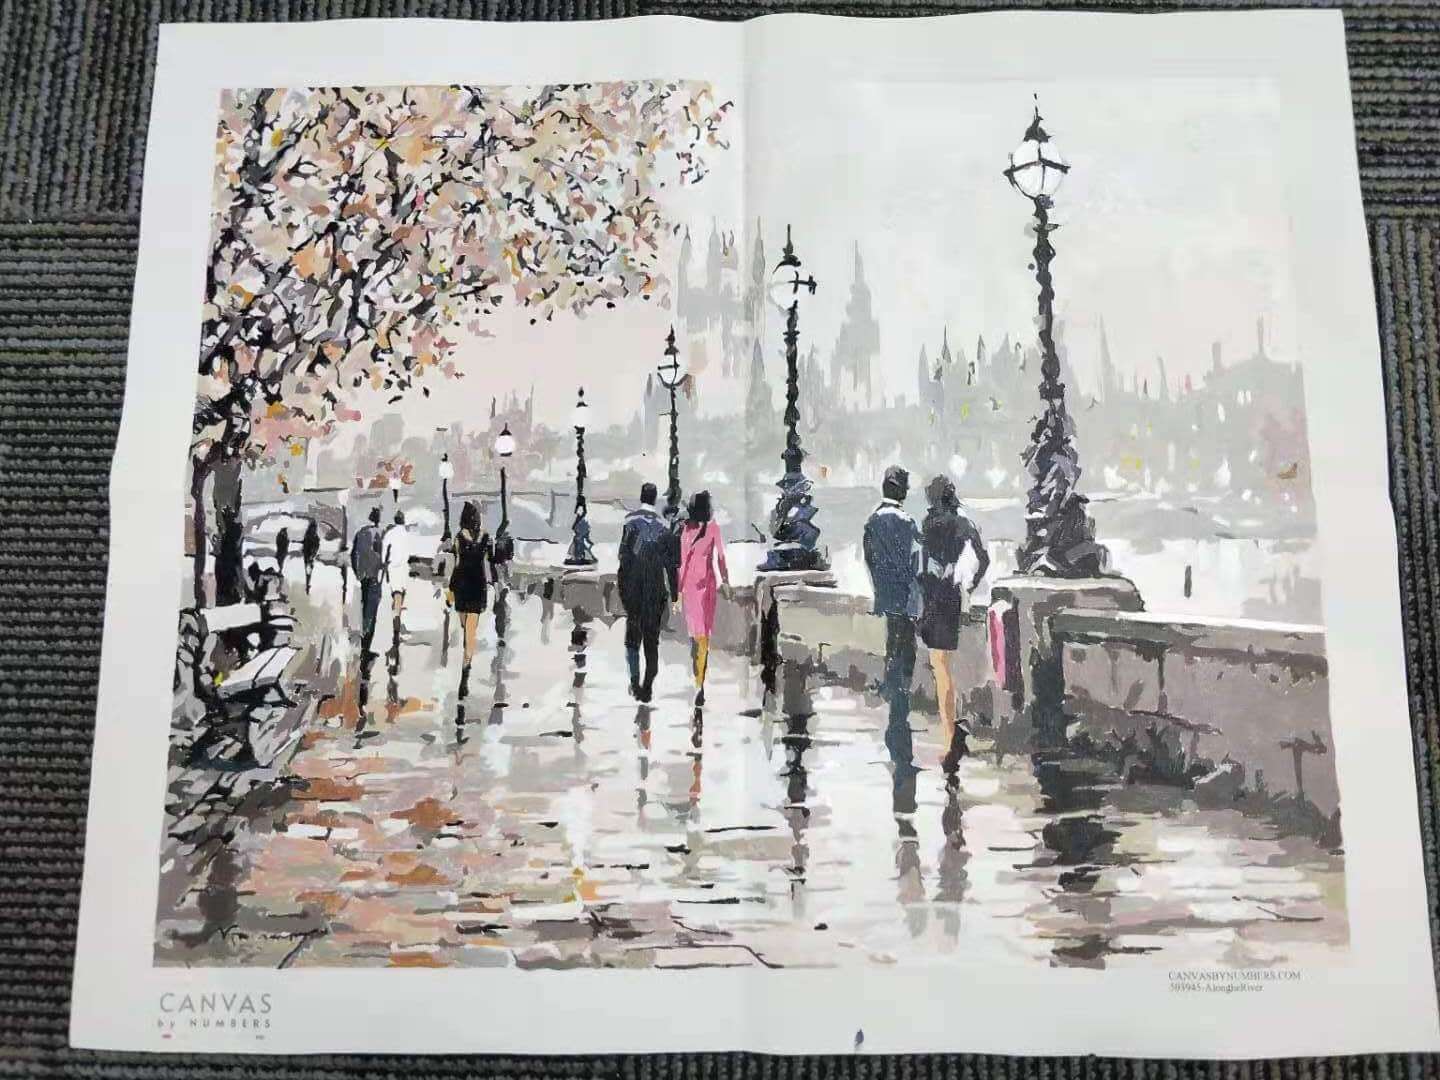 Along the River - Richard Macneil | Canvas by Numbers